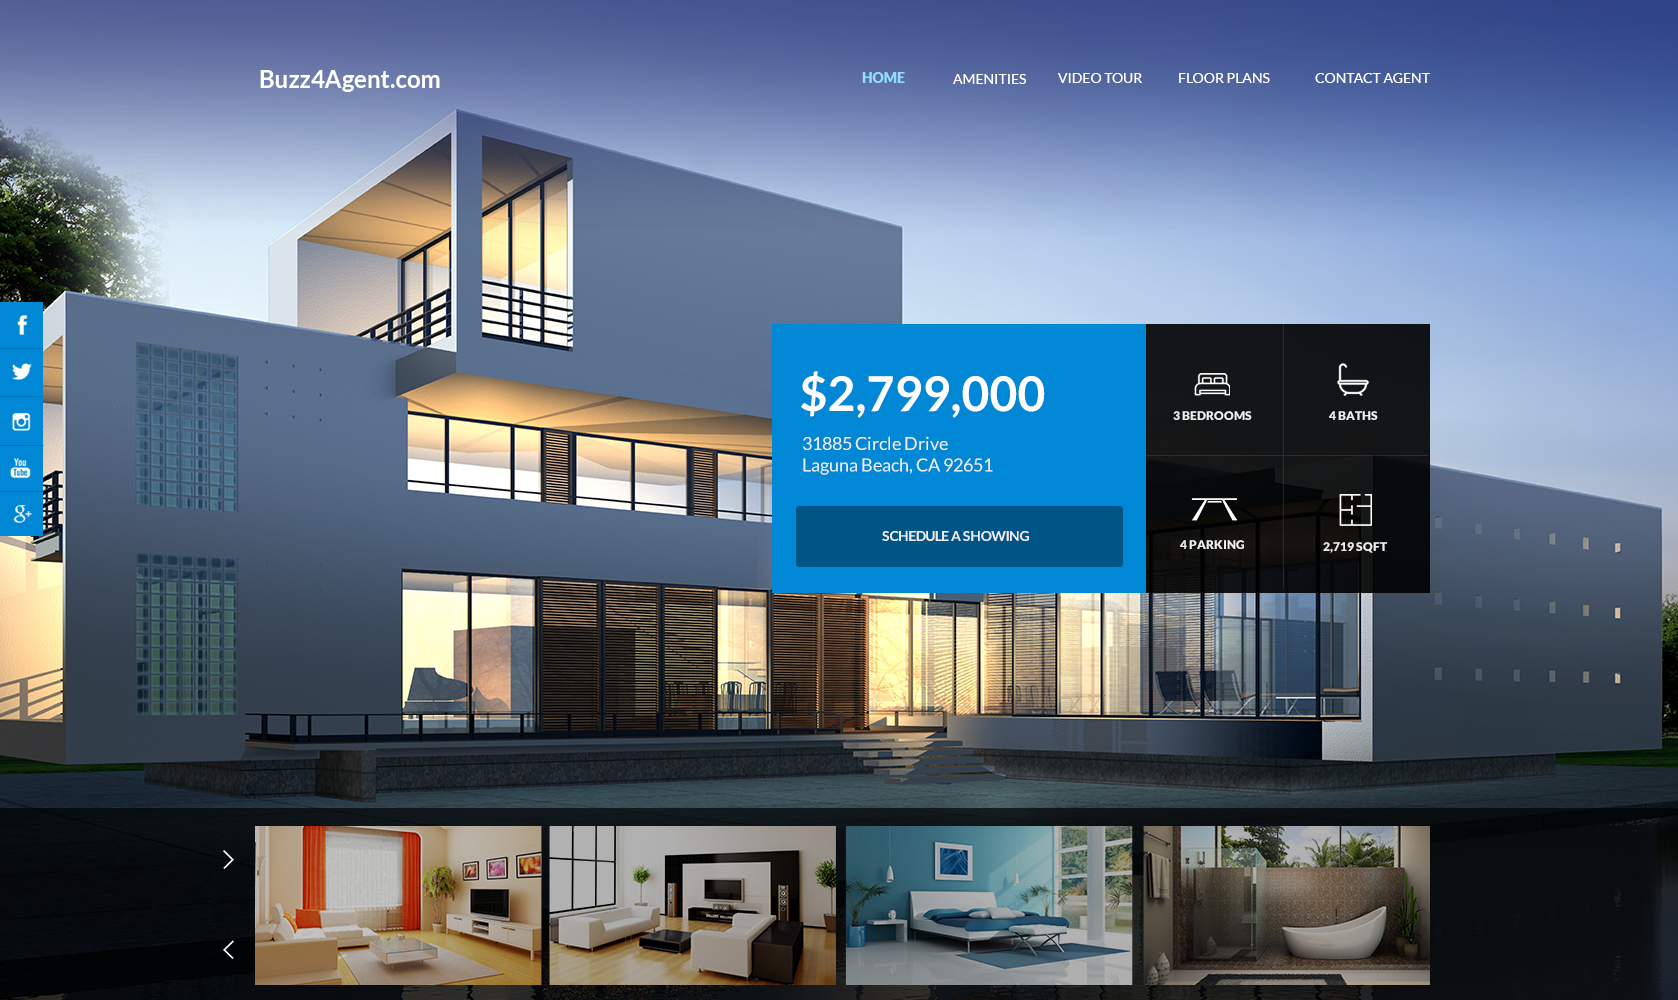 10 Best Responsive Websites for Real Estate Agents and Brokers